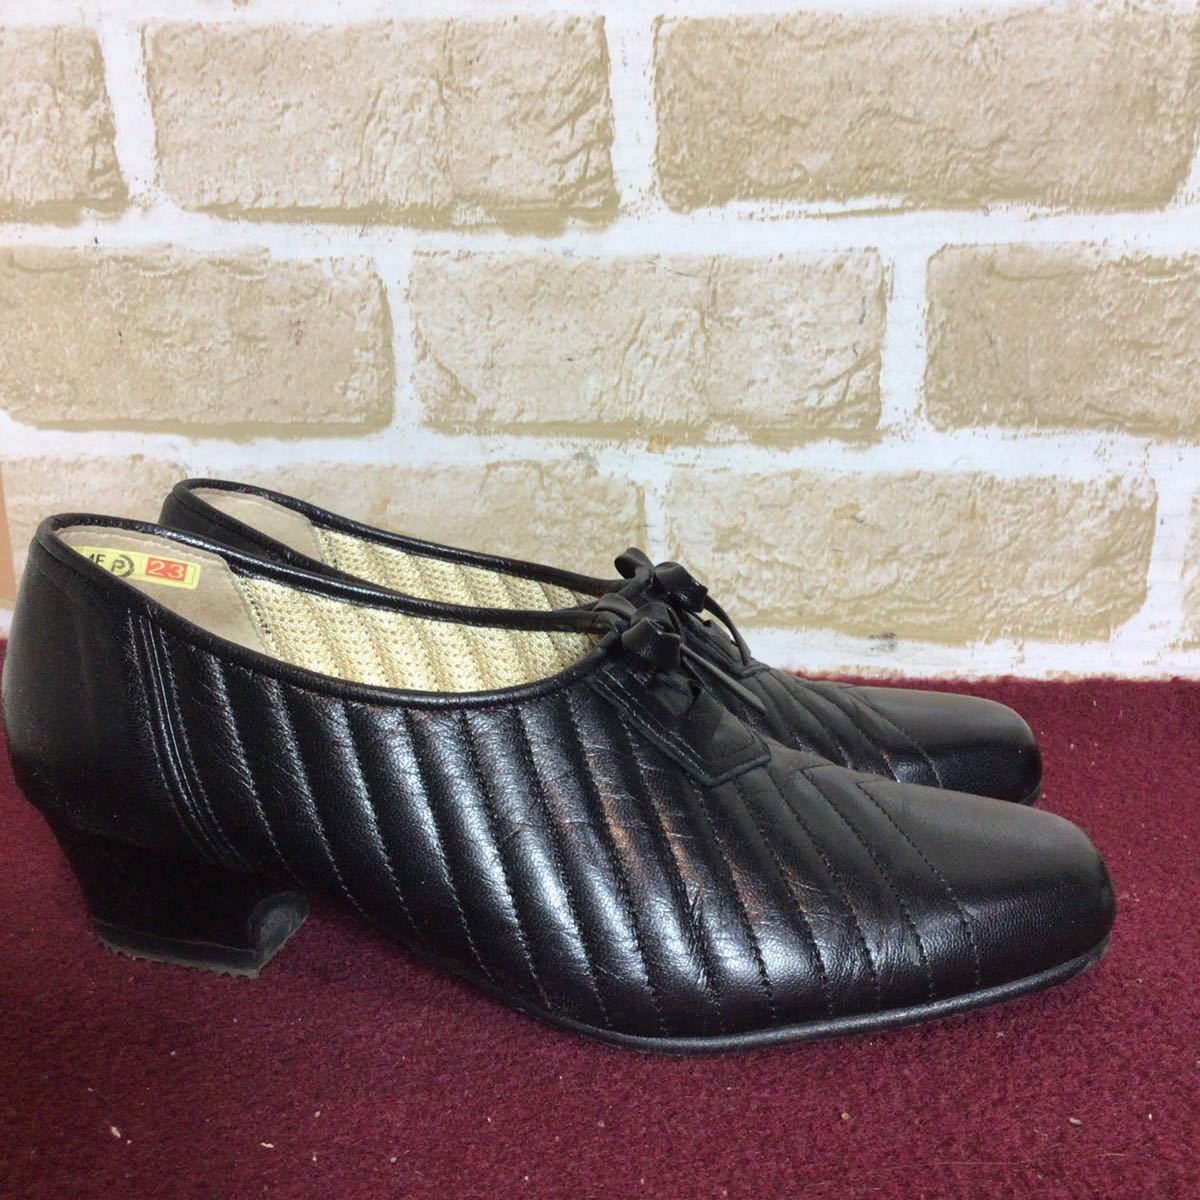 [ selling out! free shipping!]A-348 hour see. shoes! casual shoes! black! black!23.0cm EEEE! hallux valgus . recommendation! ceremonial occasions! formal! used!